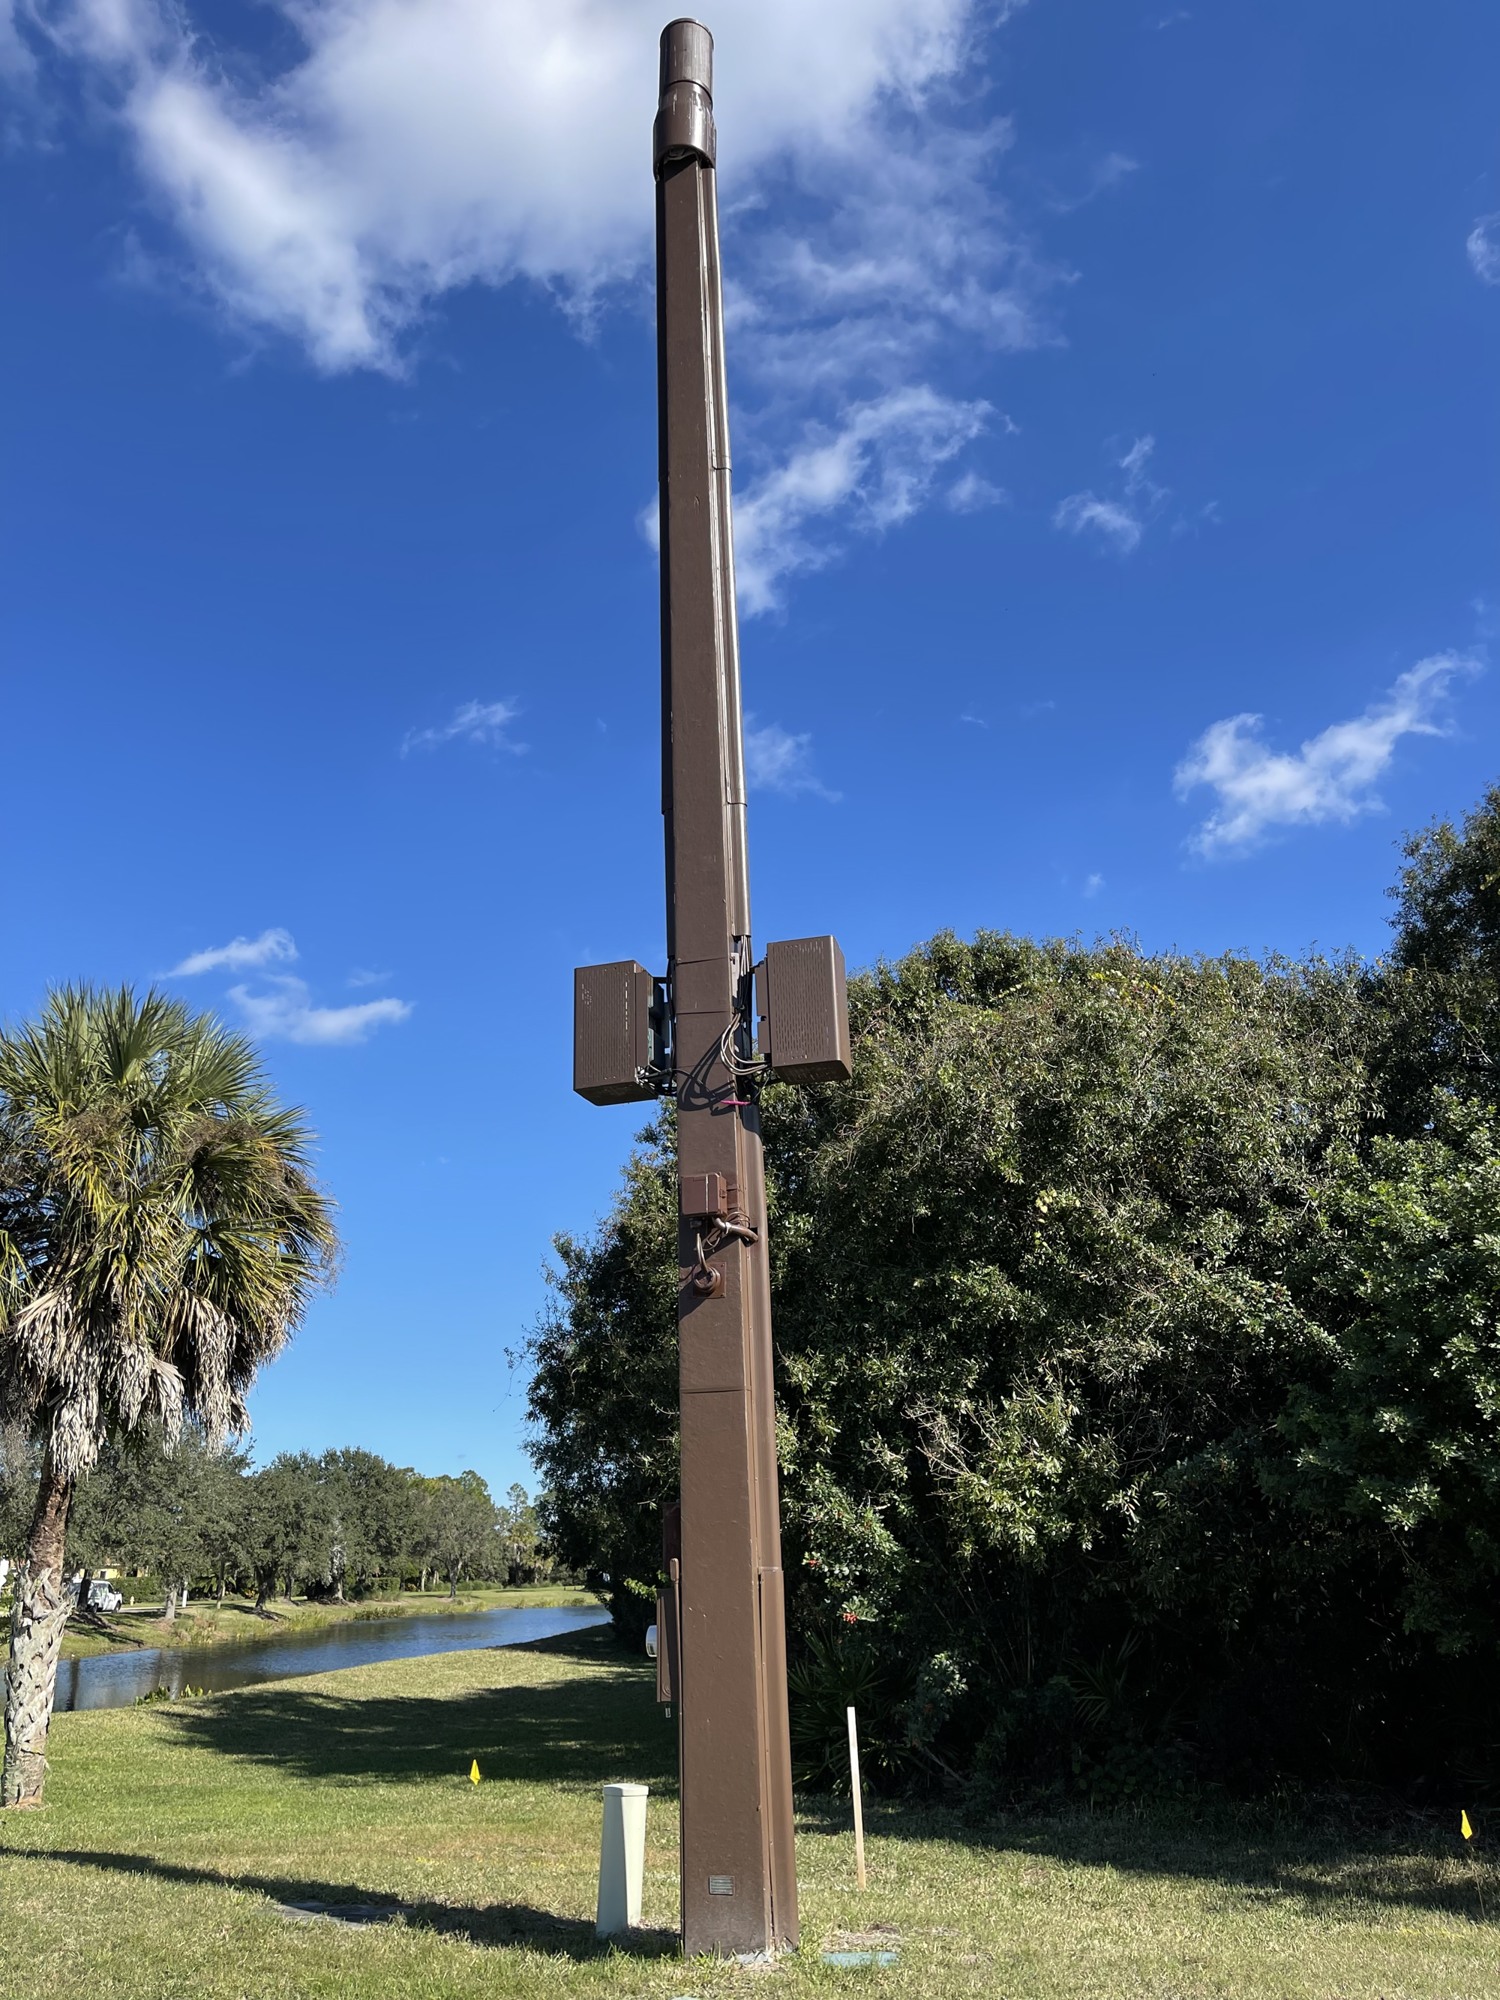 Small-cell sites like this AT&T mini-tower located near the entrance of Lakewood Ranch Country Club on Lakewood Ranch Boulevard have helped boost cell service in the area.